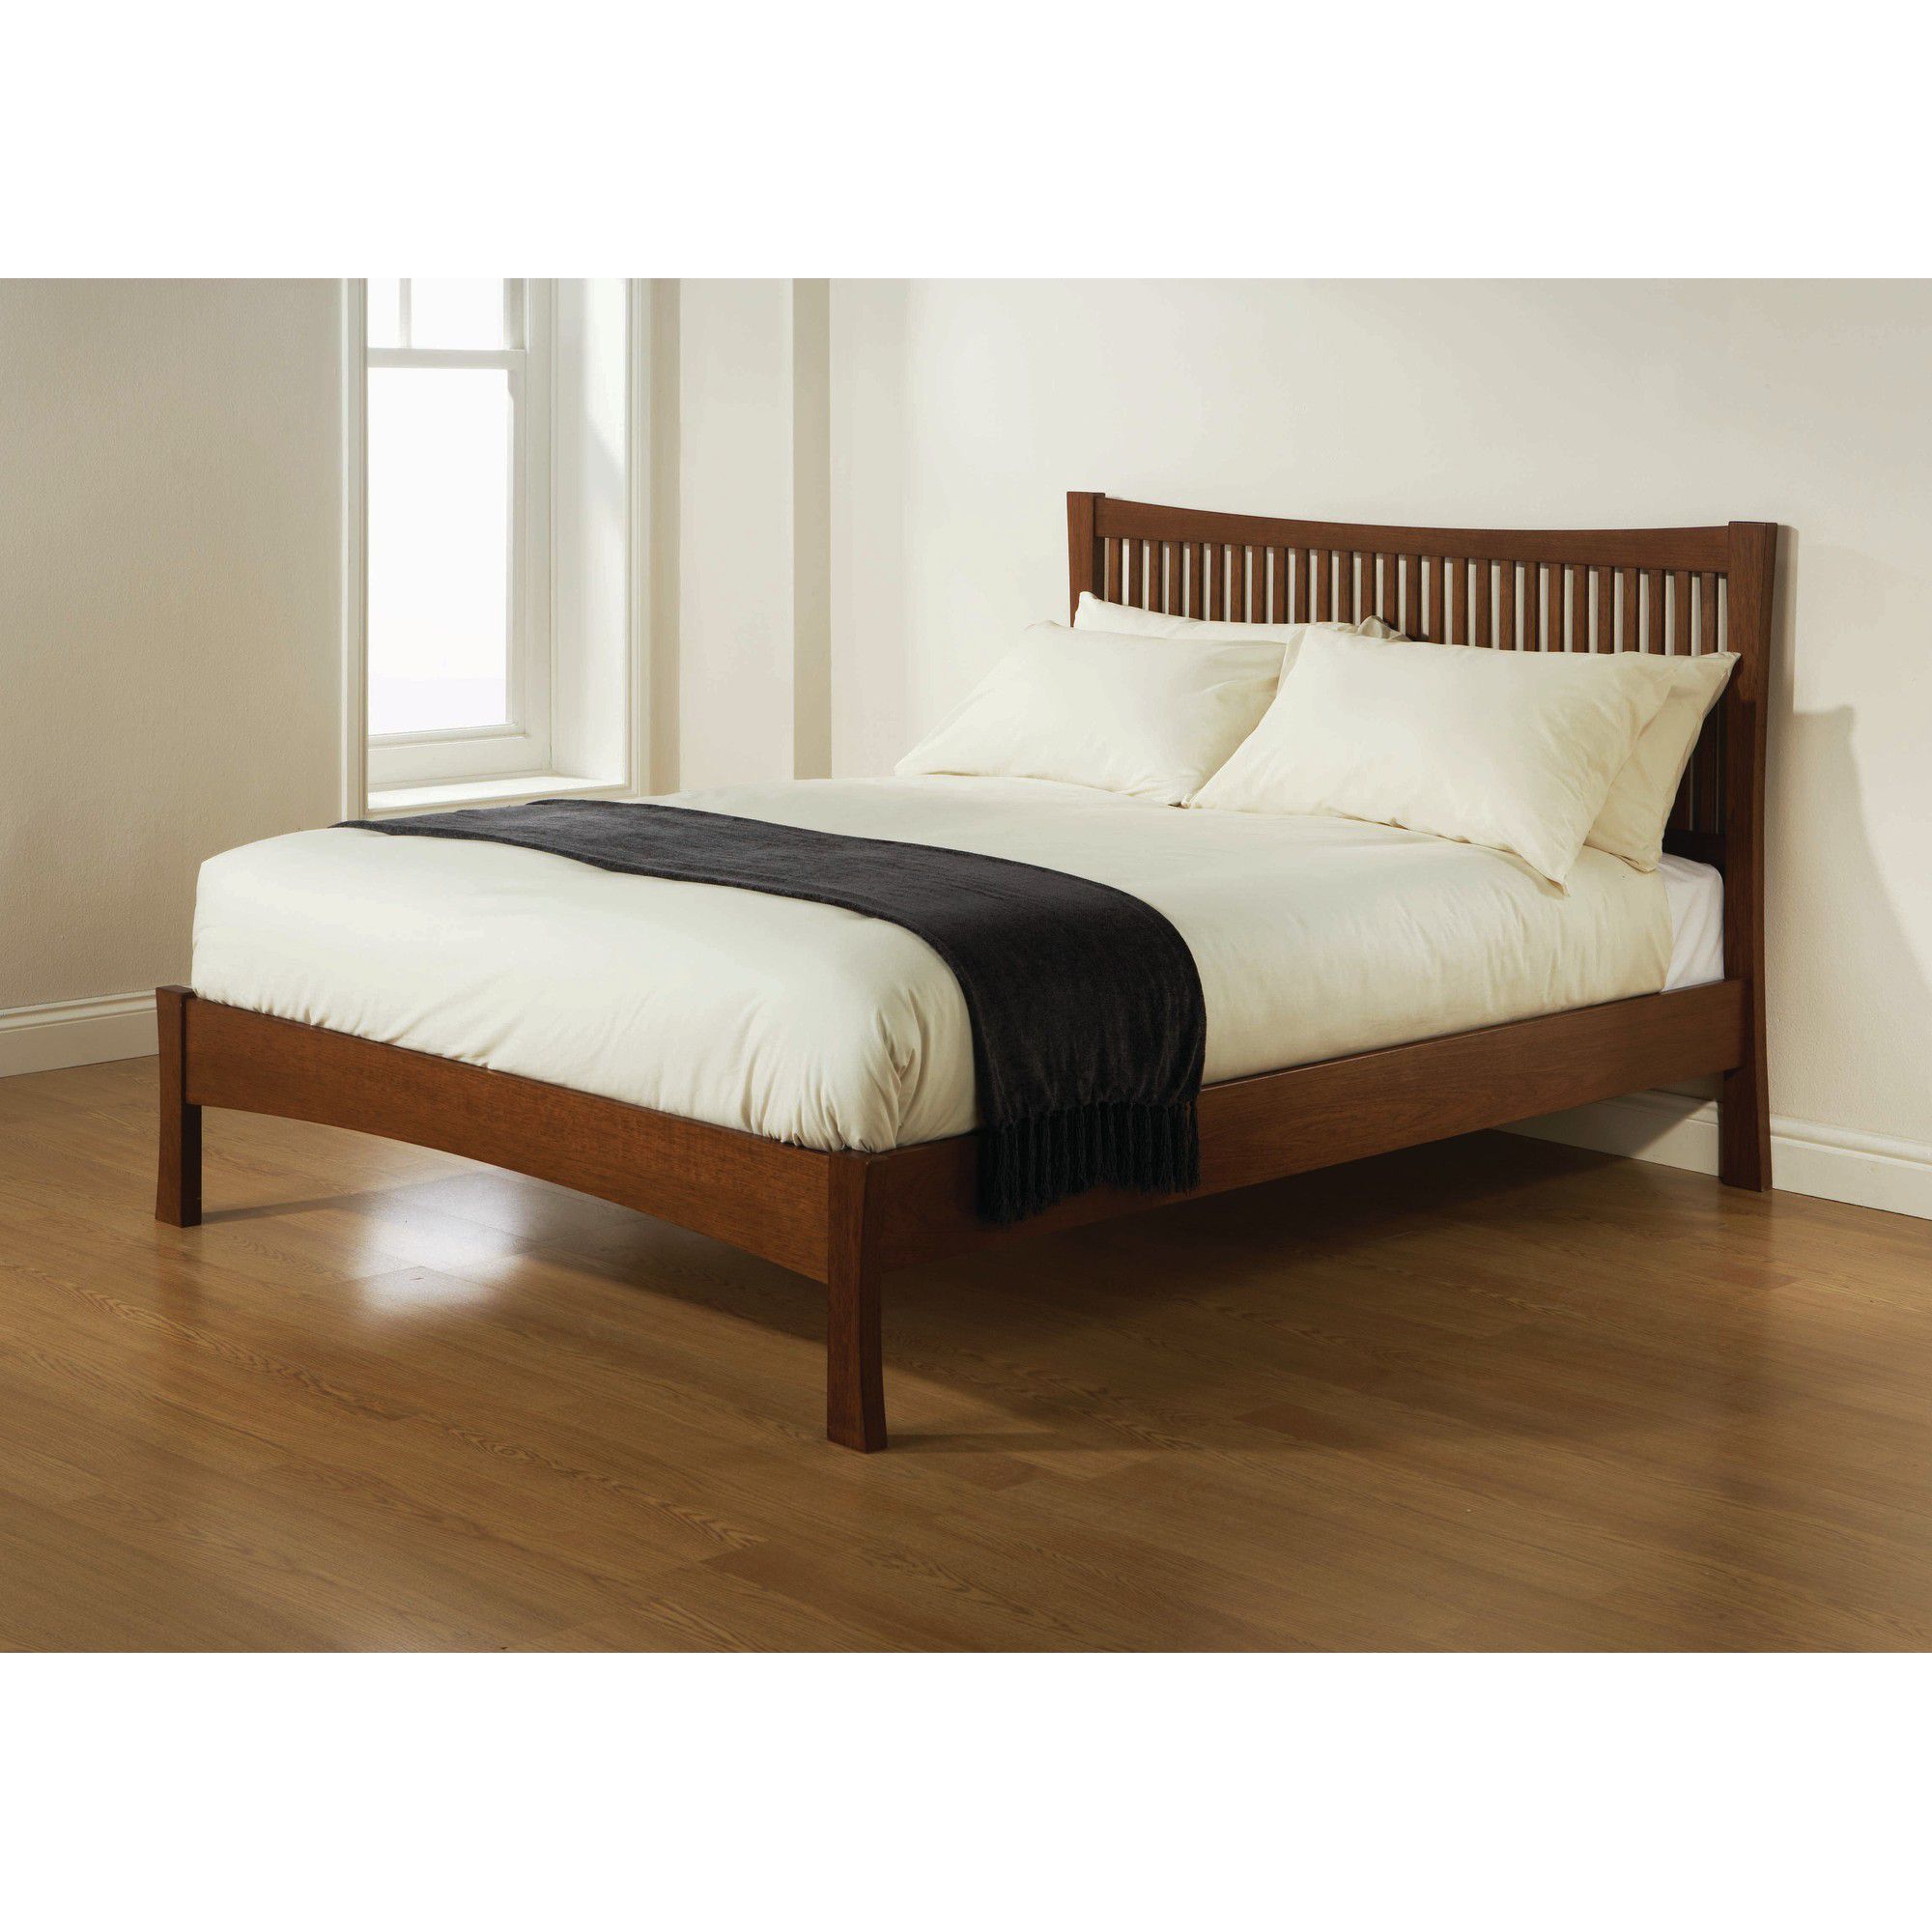 Elements Orient Bed - Double at Tesco Direct